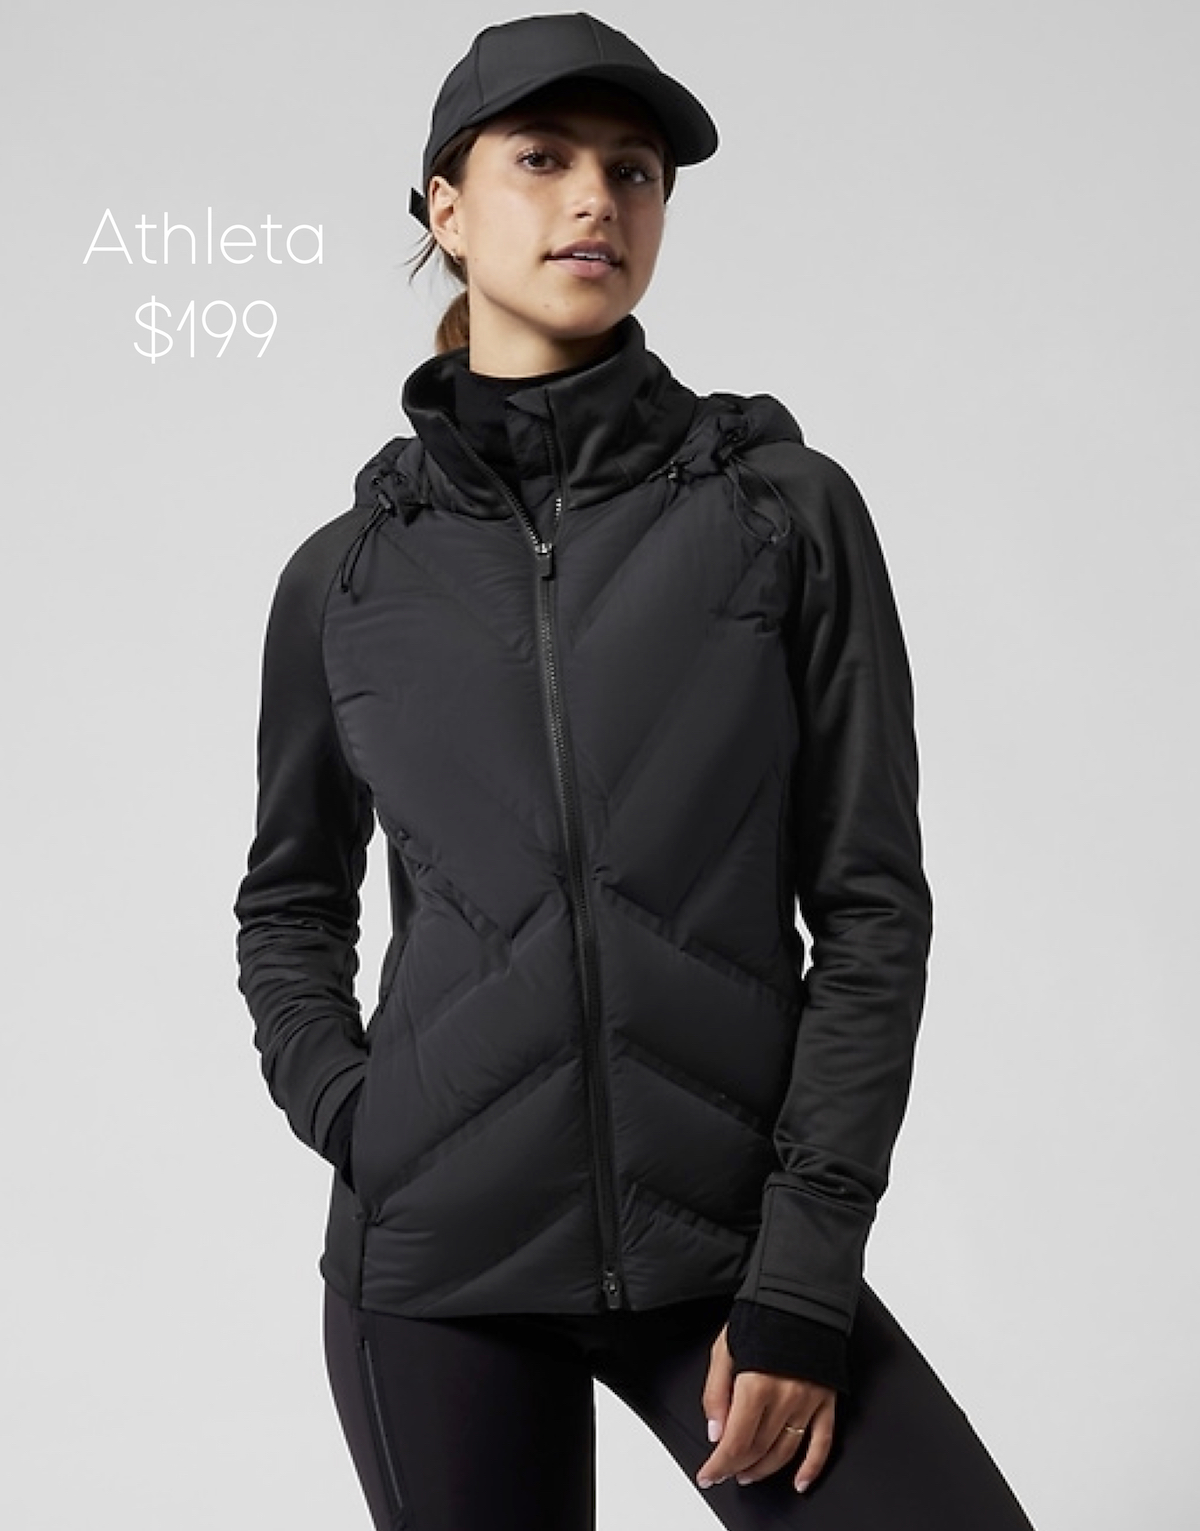 stock photo of woman wearing black quilted jacket from athleta